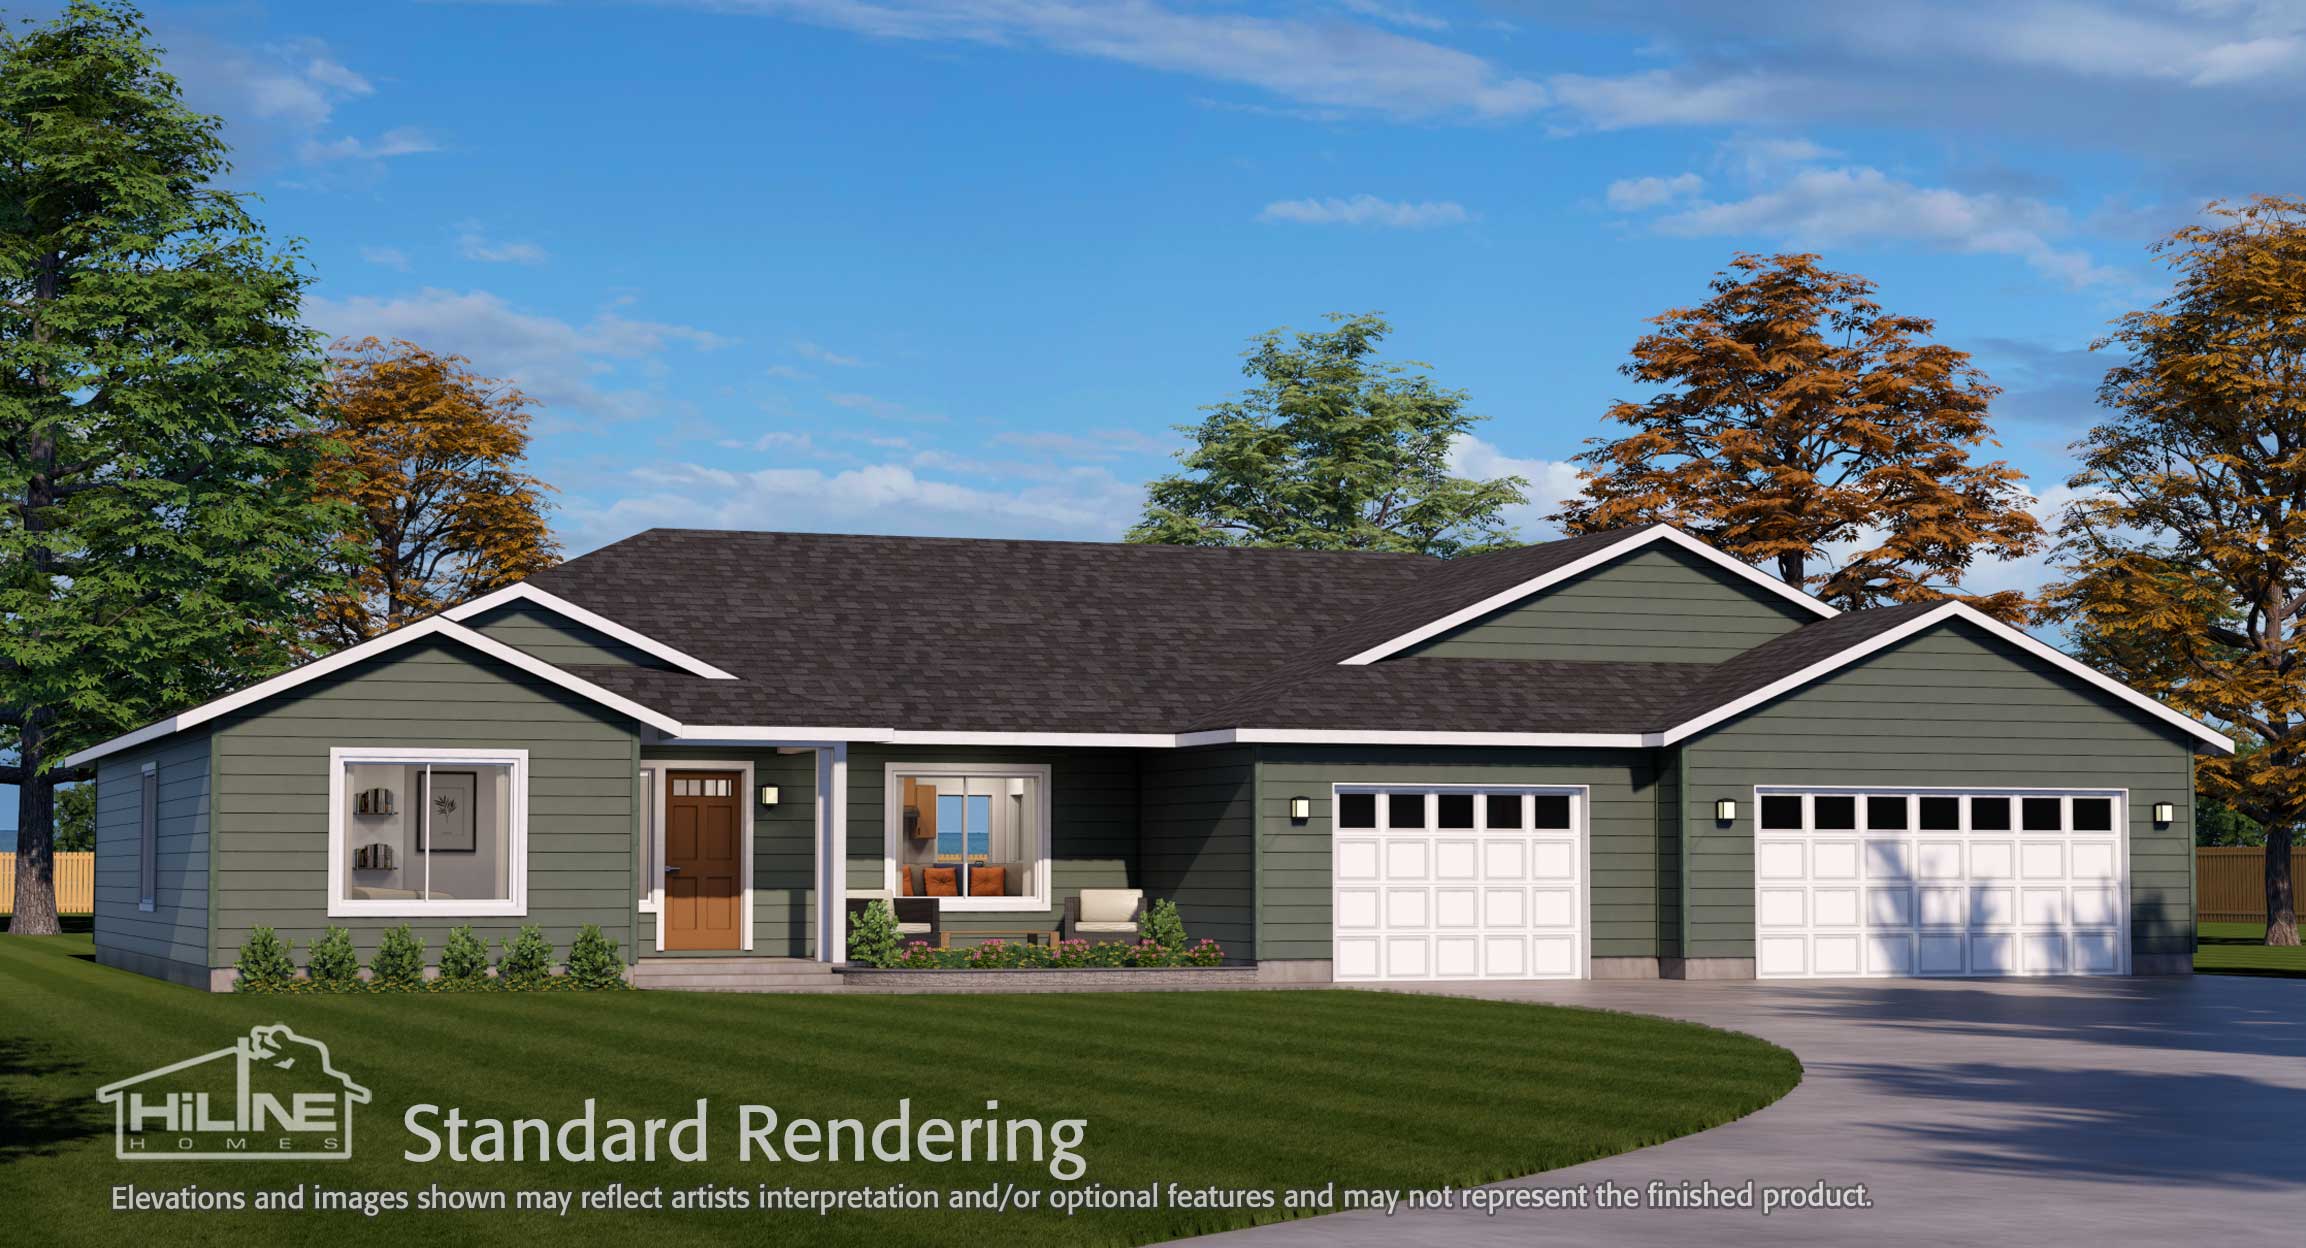 Image of Home Plan 2248 Front Exterior.